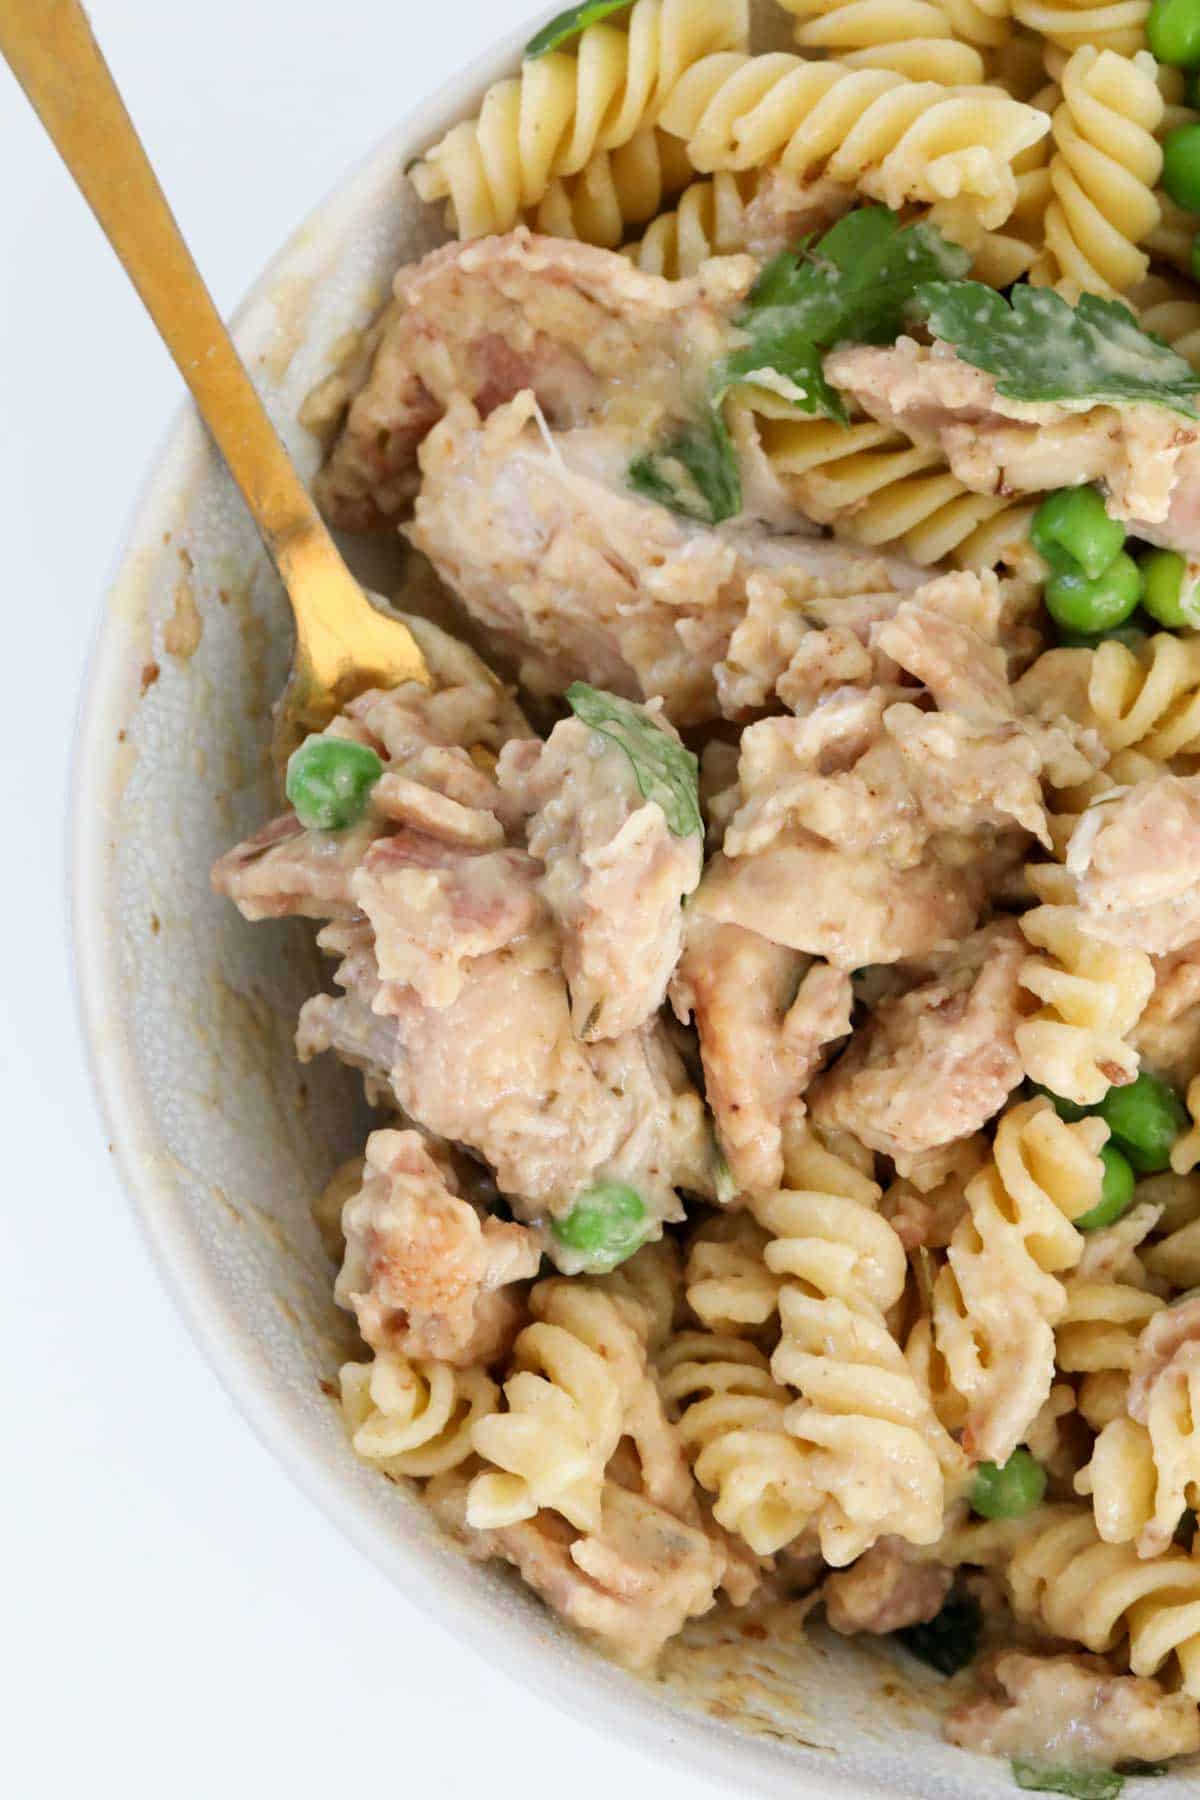 French onion chicken bake with pasta and peas.